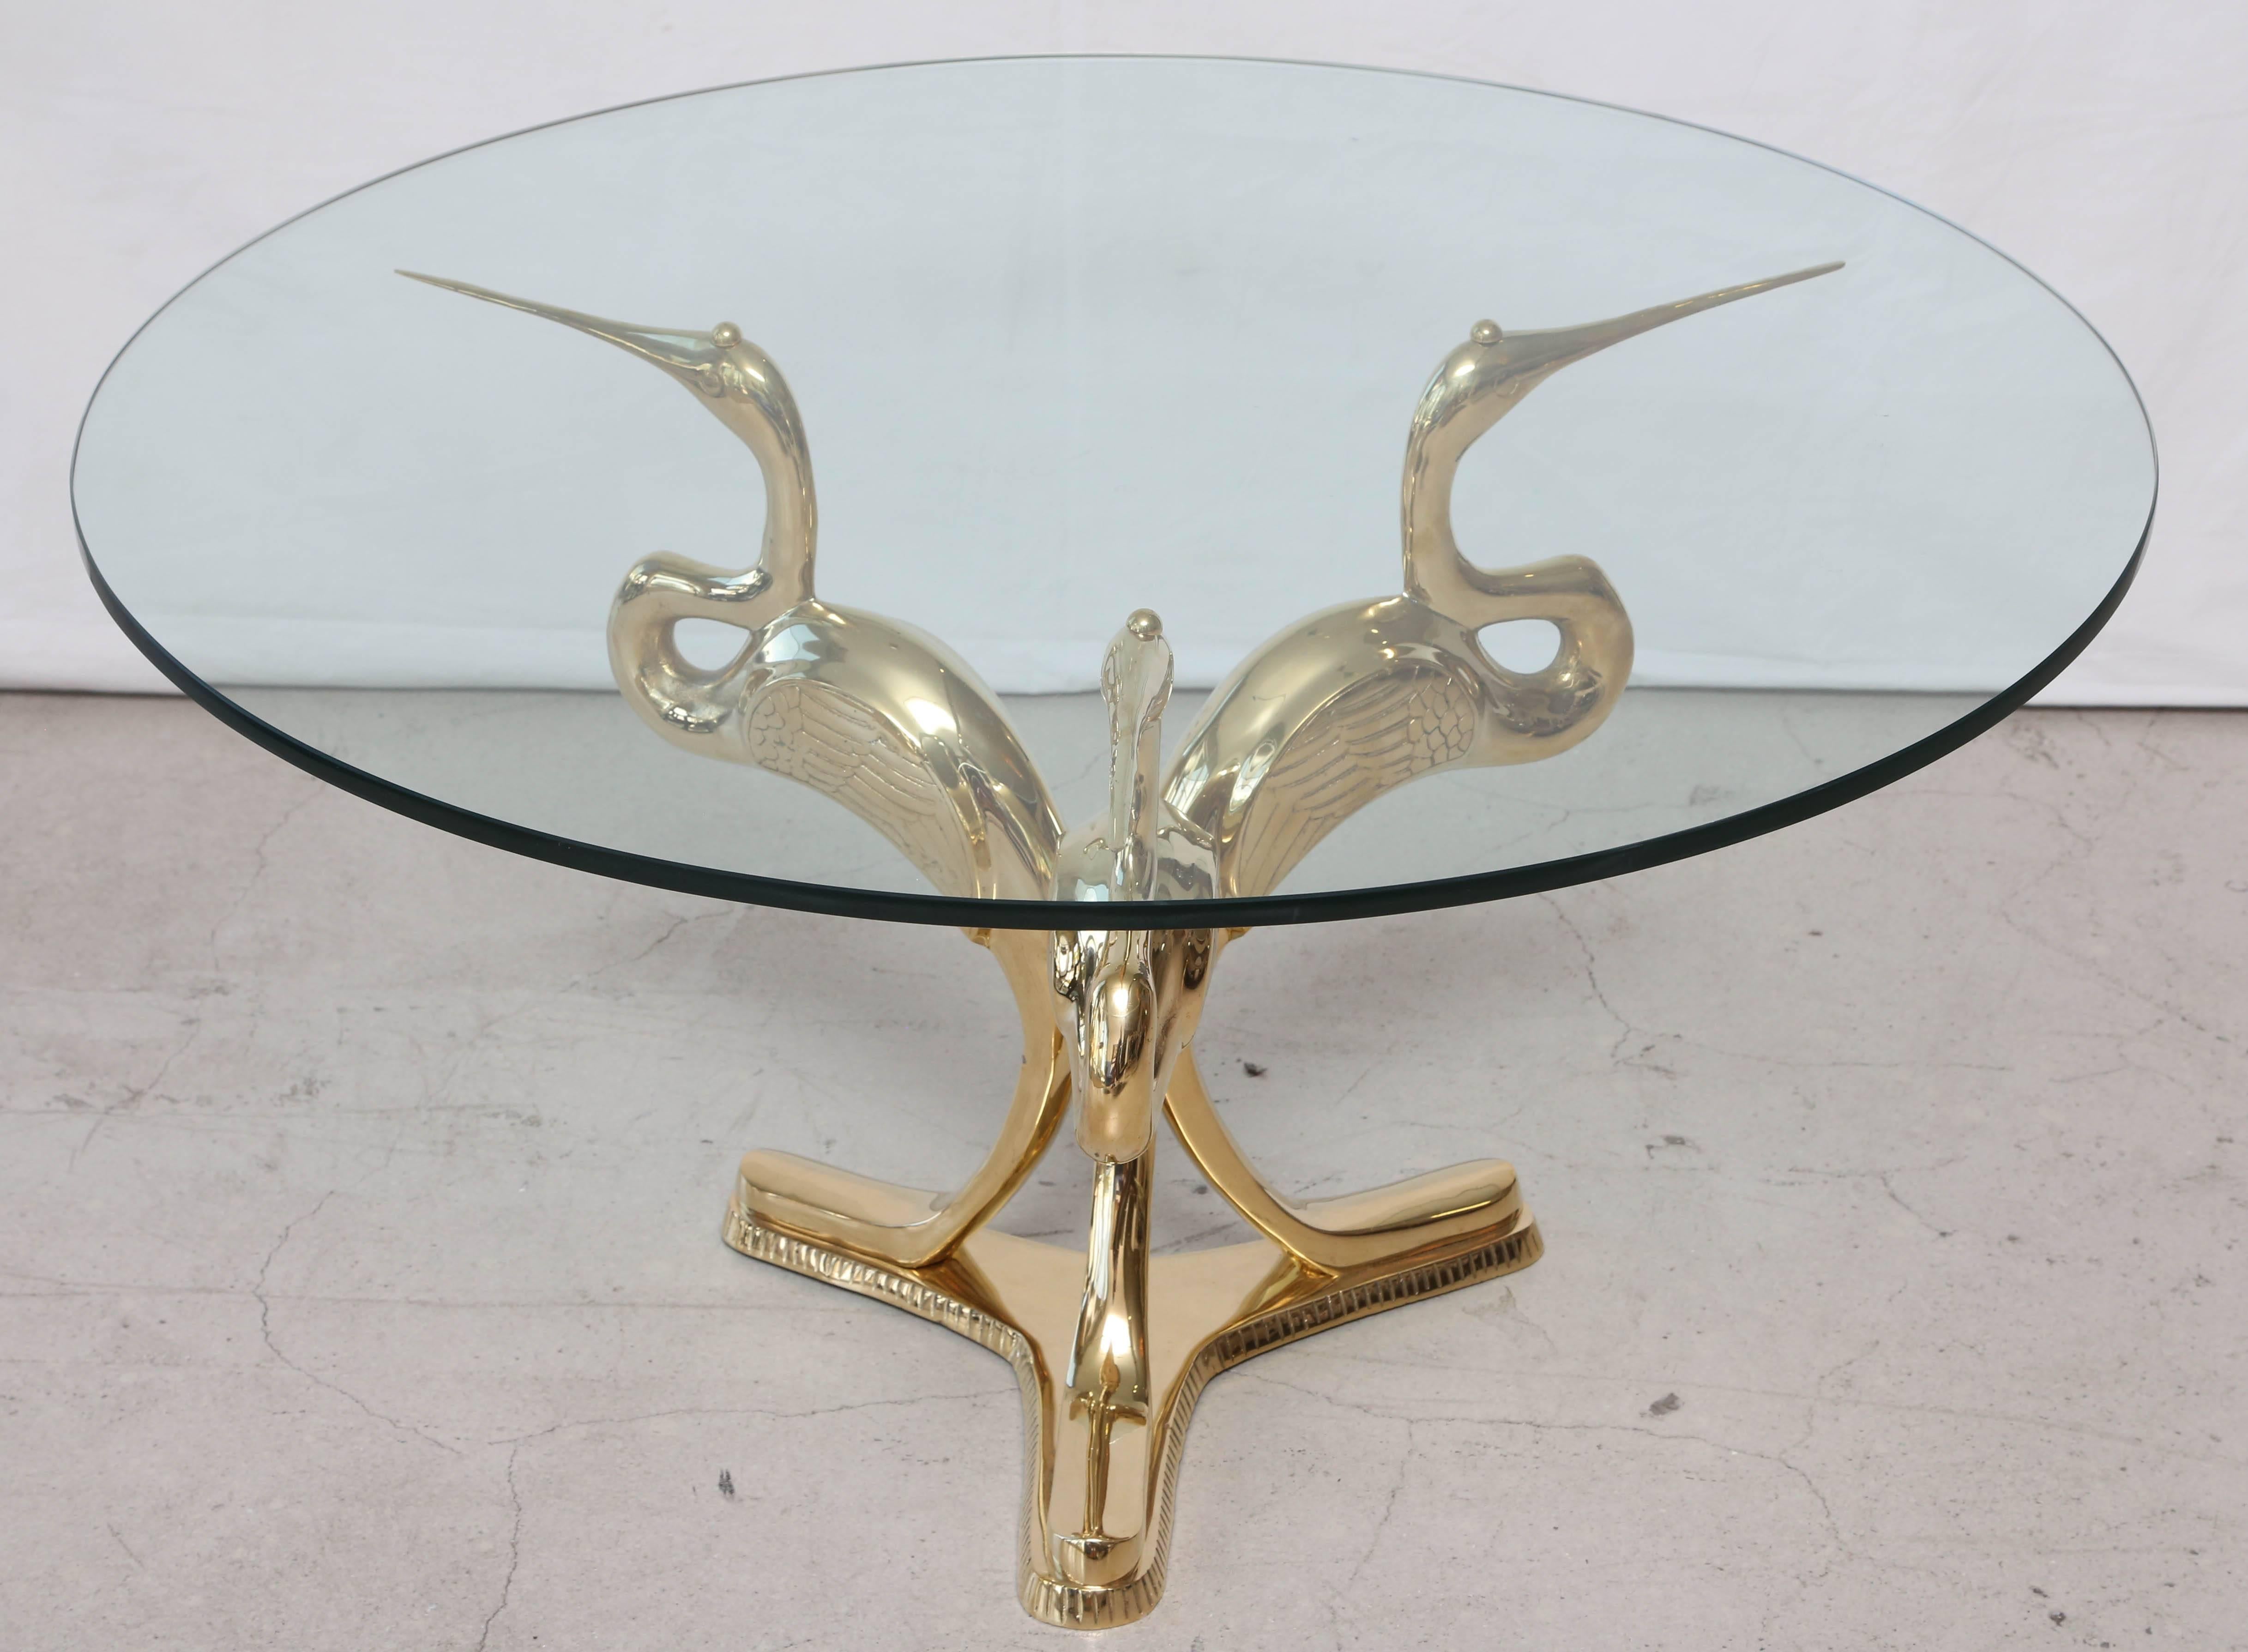 Vintage Italian Polished Brass Bird Table with Glass Top In Good Condition For Sale In West Palm Beach, FL